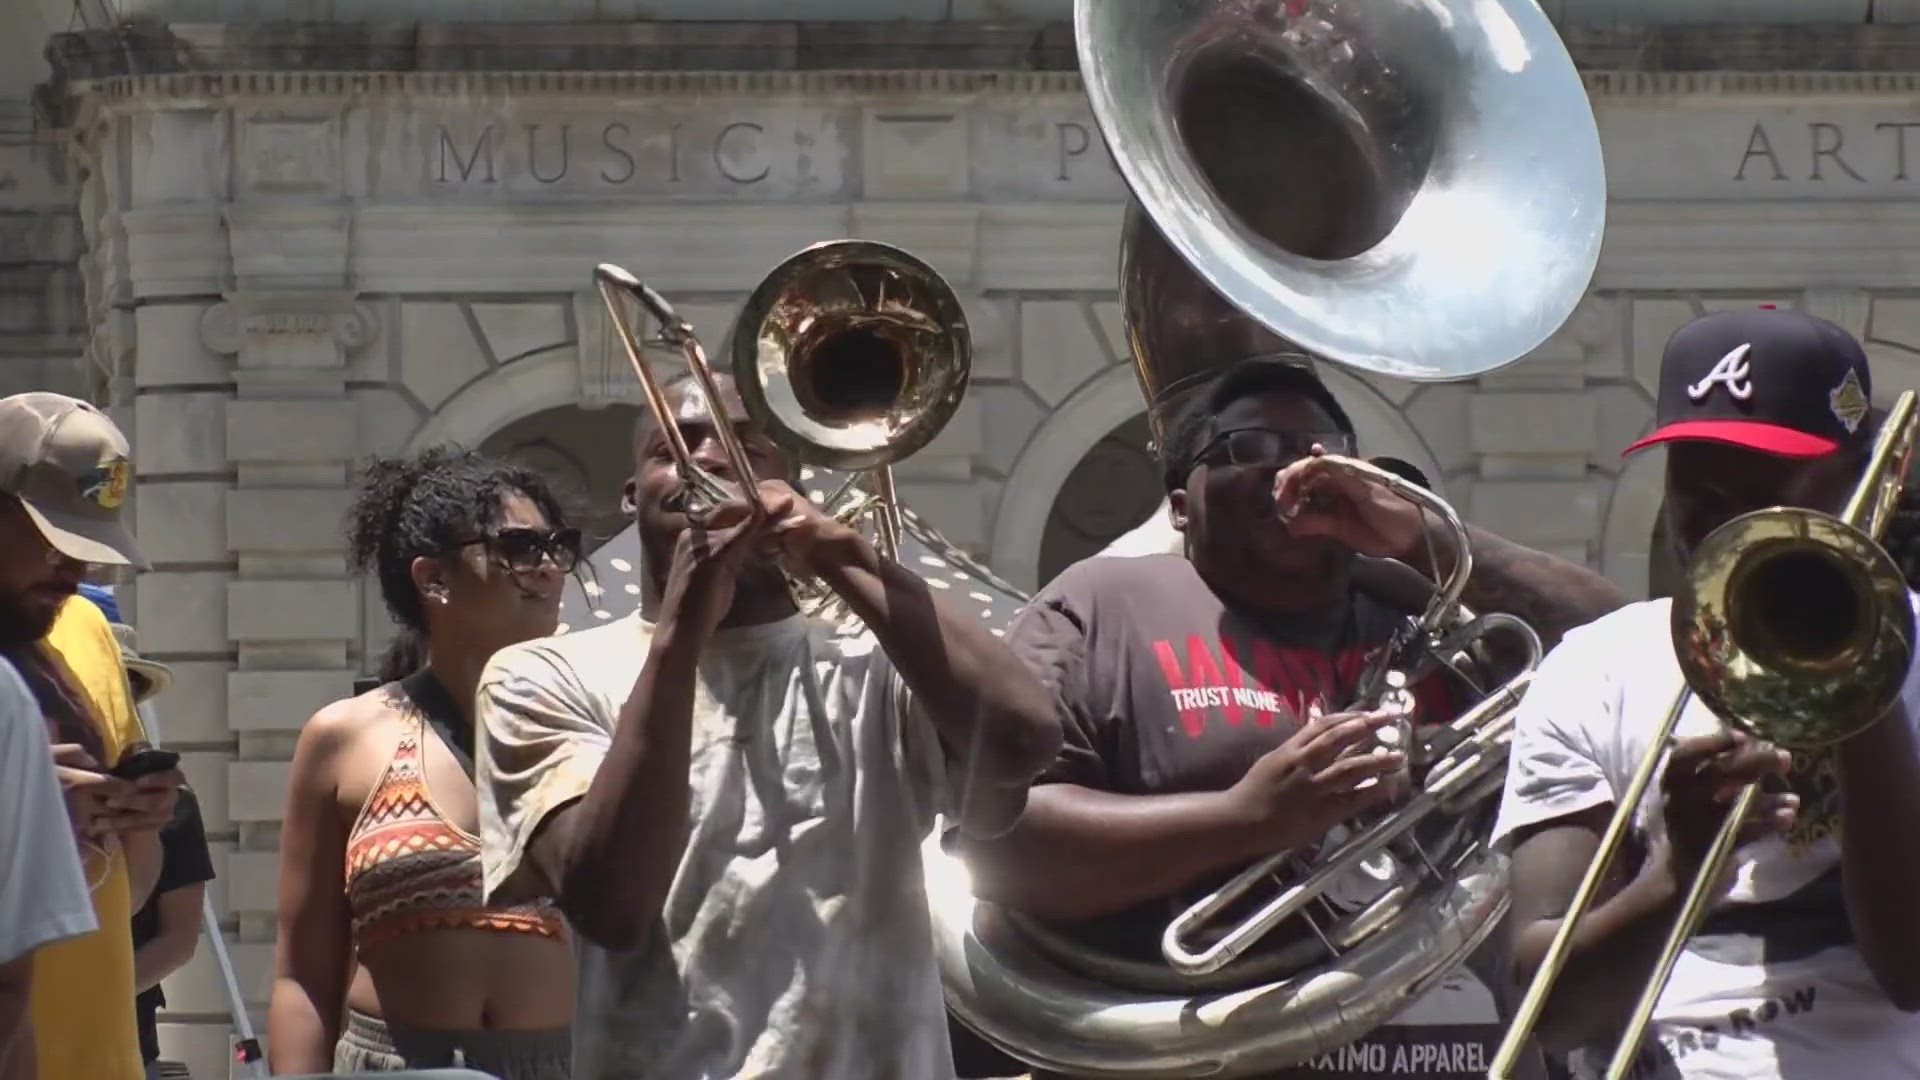 Today, New Orleans honored the past while celebrating the future.